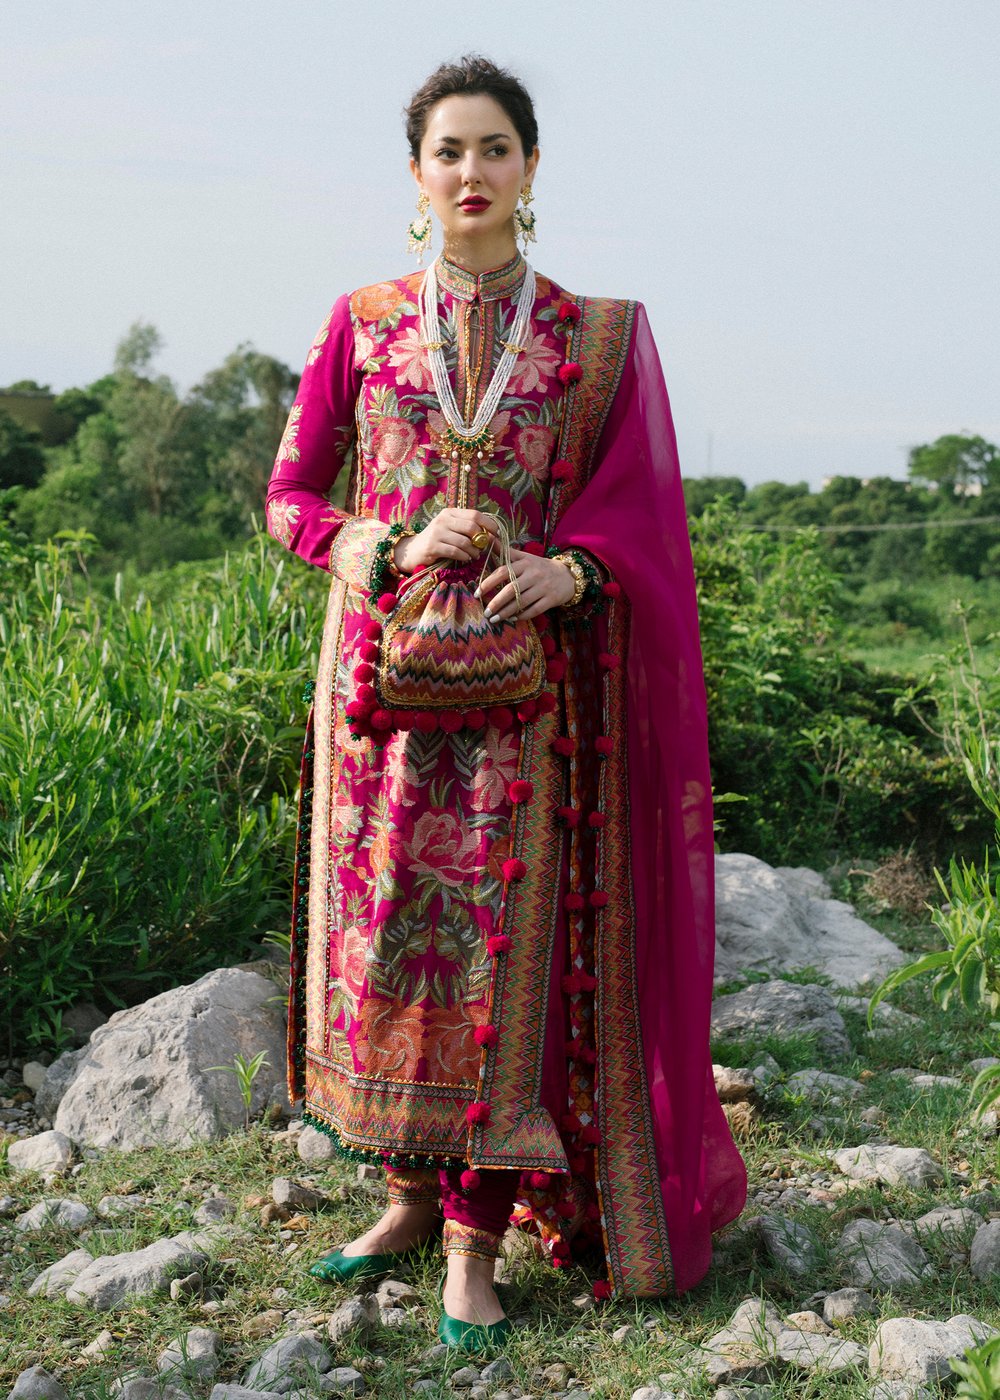 HUSSAIN REHAR | HUSSAIN REHAR | RUMLI | Gulan Pink Lawn dress is extremely trending for HUSAIN REHAR 2021 lawn. The PAKISTANI DRESSES IN UK are available for this wedding season. Get the exclusive customized Maria B, Asim Jofa Bridal, PAKISTANI DRESSES from our PAKISTANI BOUTIQUE in UK, USA, Austria from Lebaasonline 